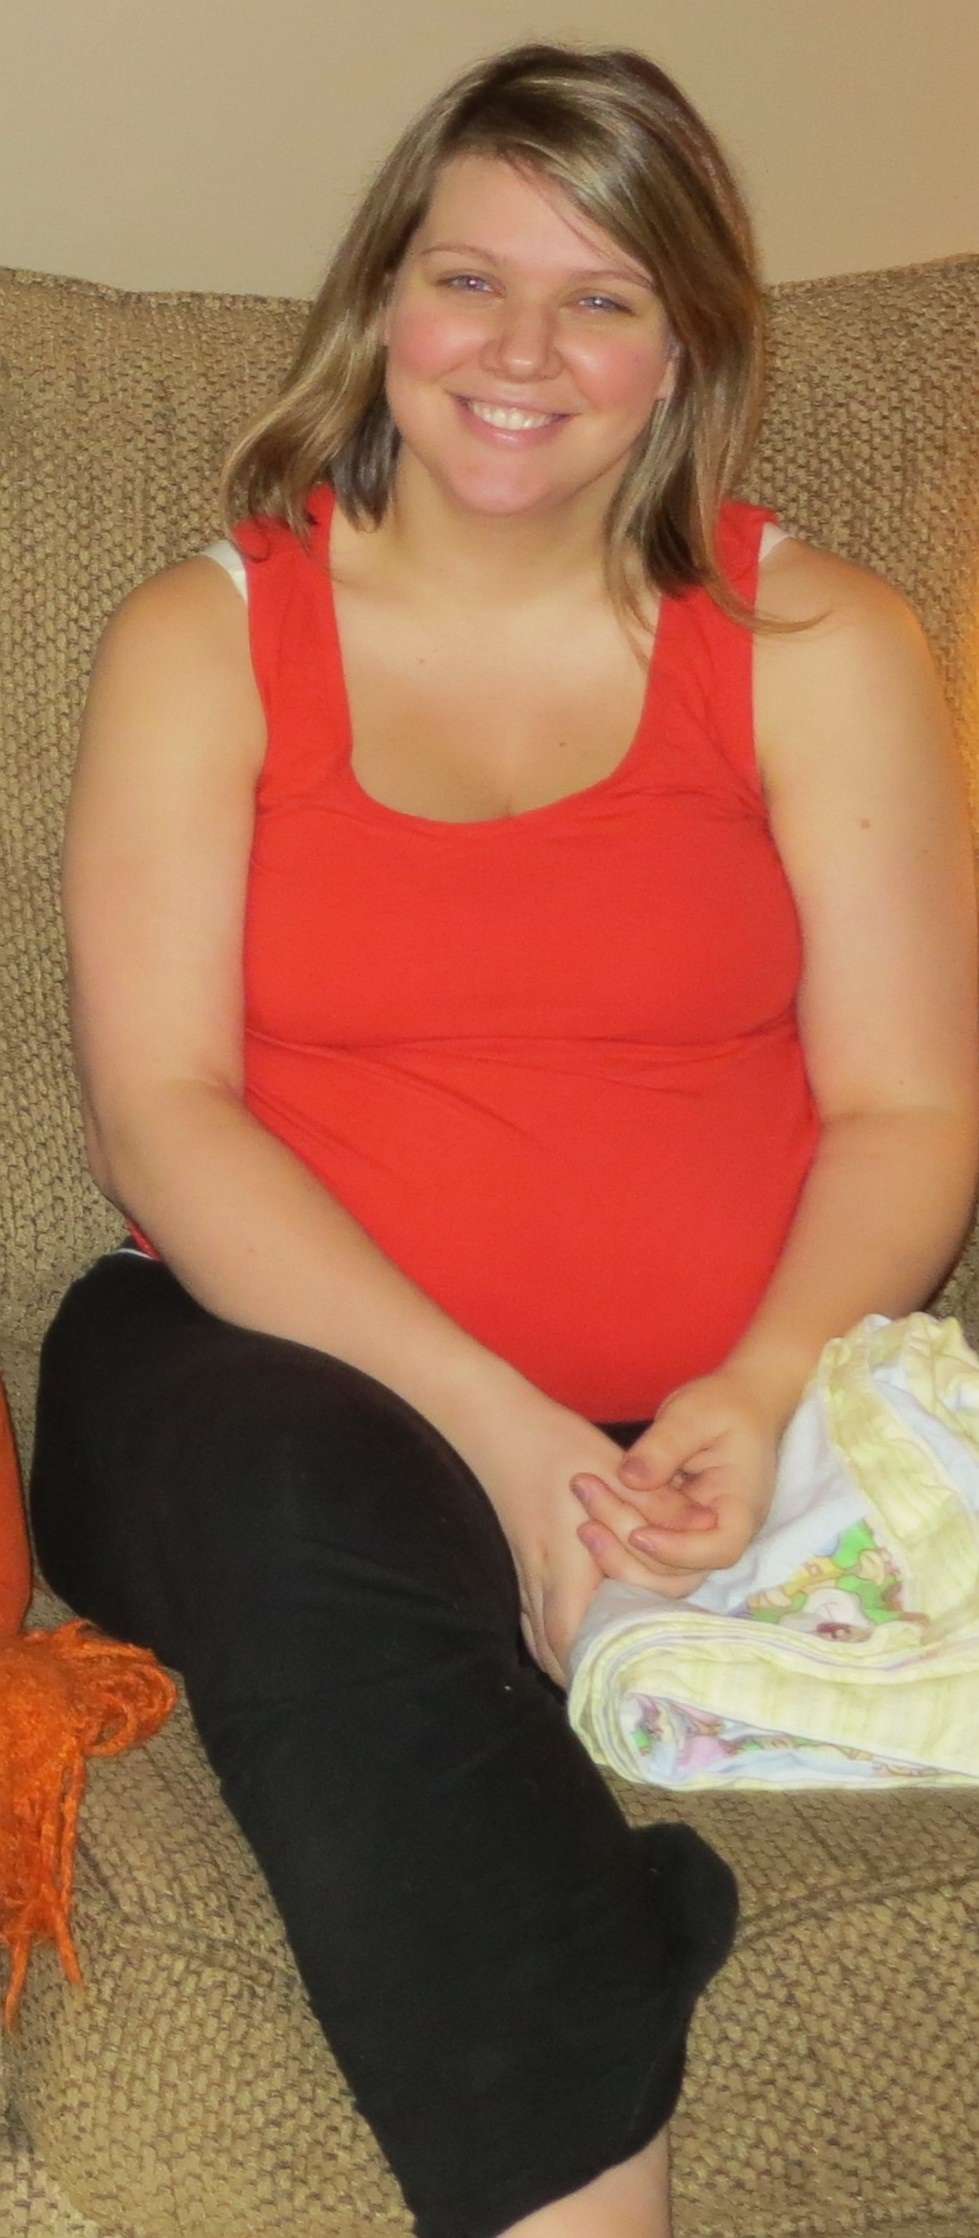 PHOTO: Brianna Bernard is photographed before her weight loss.